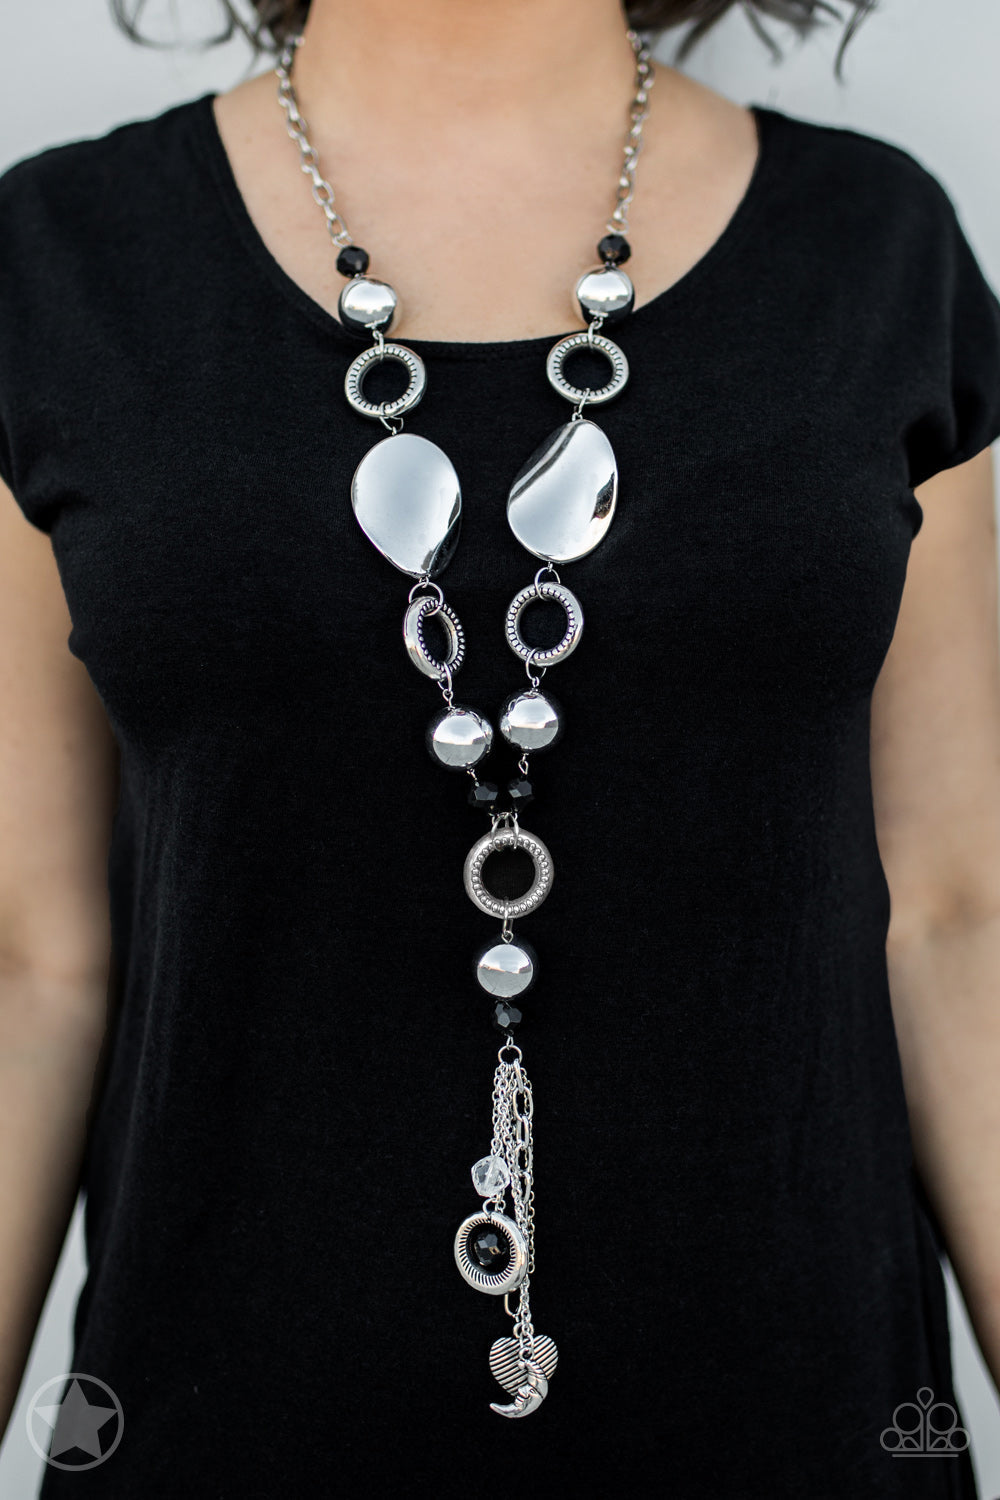 Total Eclipse Of the Heart - Silver and Black Necklace - Paparazzi Accessories - Long chain of black crystalized beads, curved plates of silver with a pearly finish, and chunky silver rings lead down to a tassel of chains and charms, including a crescent moon and a heart. 